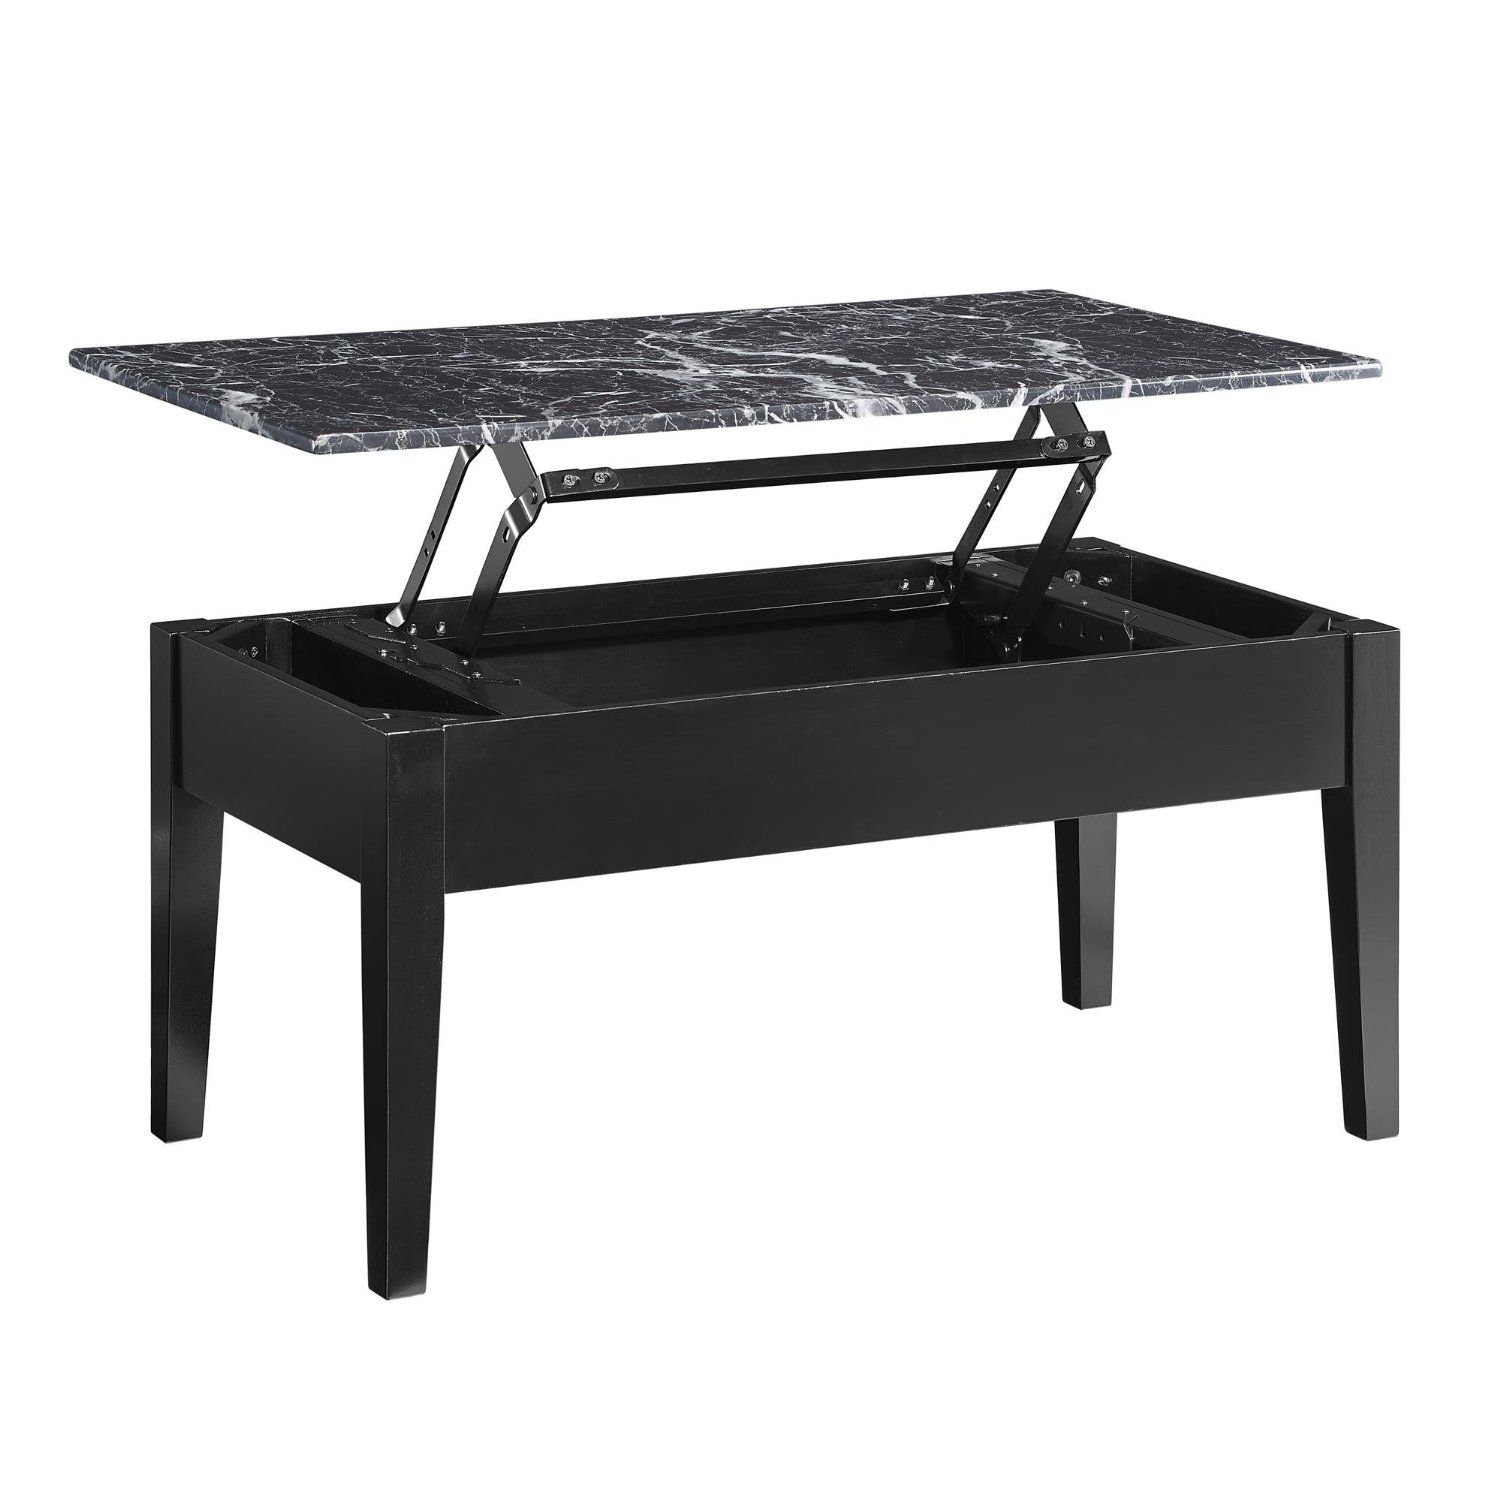 Coffee Tables Ikea Usa The Glass Tabletop On The Other Hand Create And Elegant Feel Of The Table (View 7 of 9)